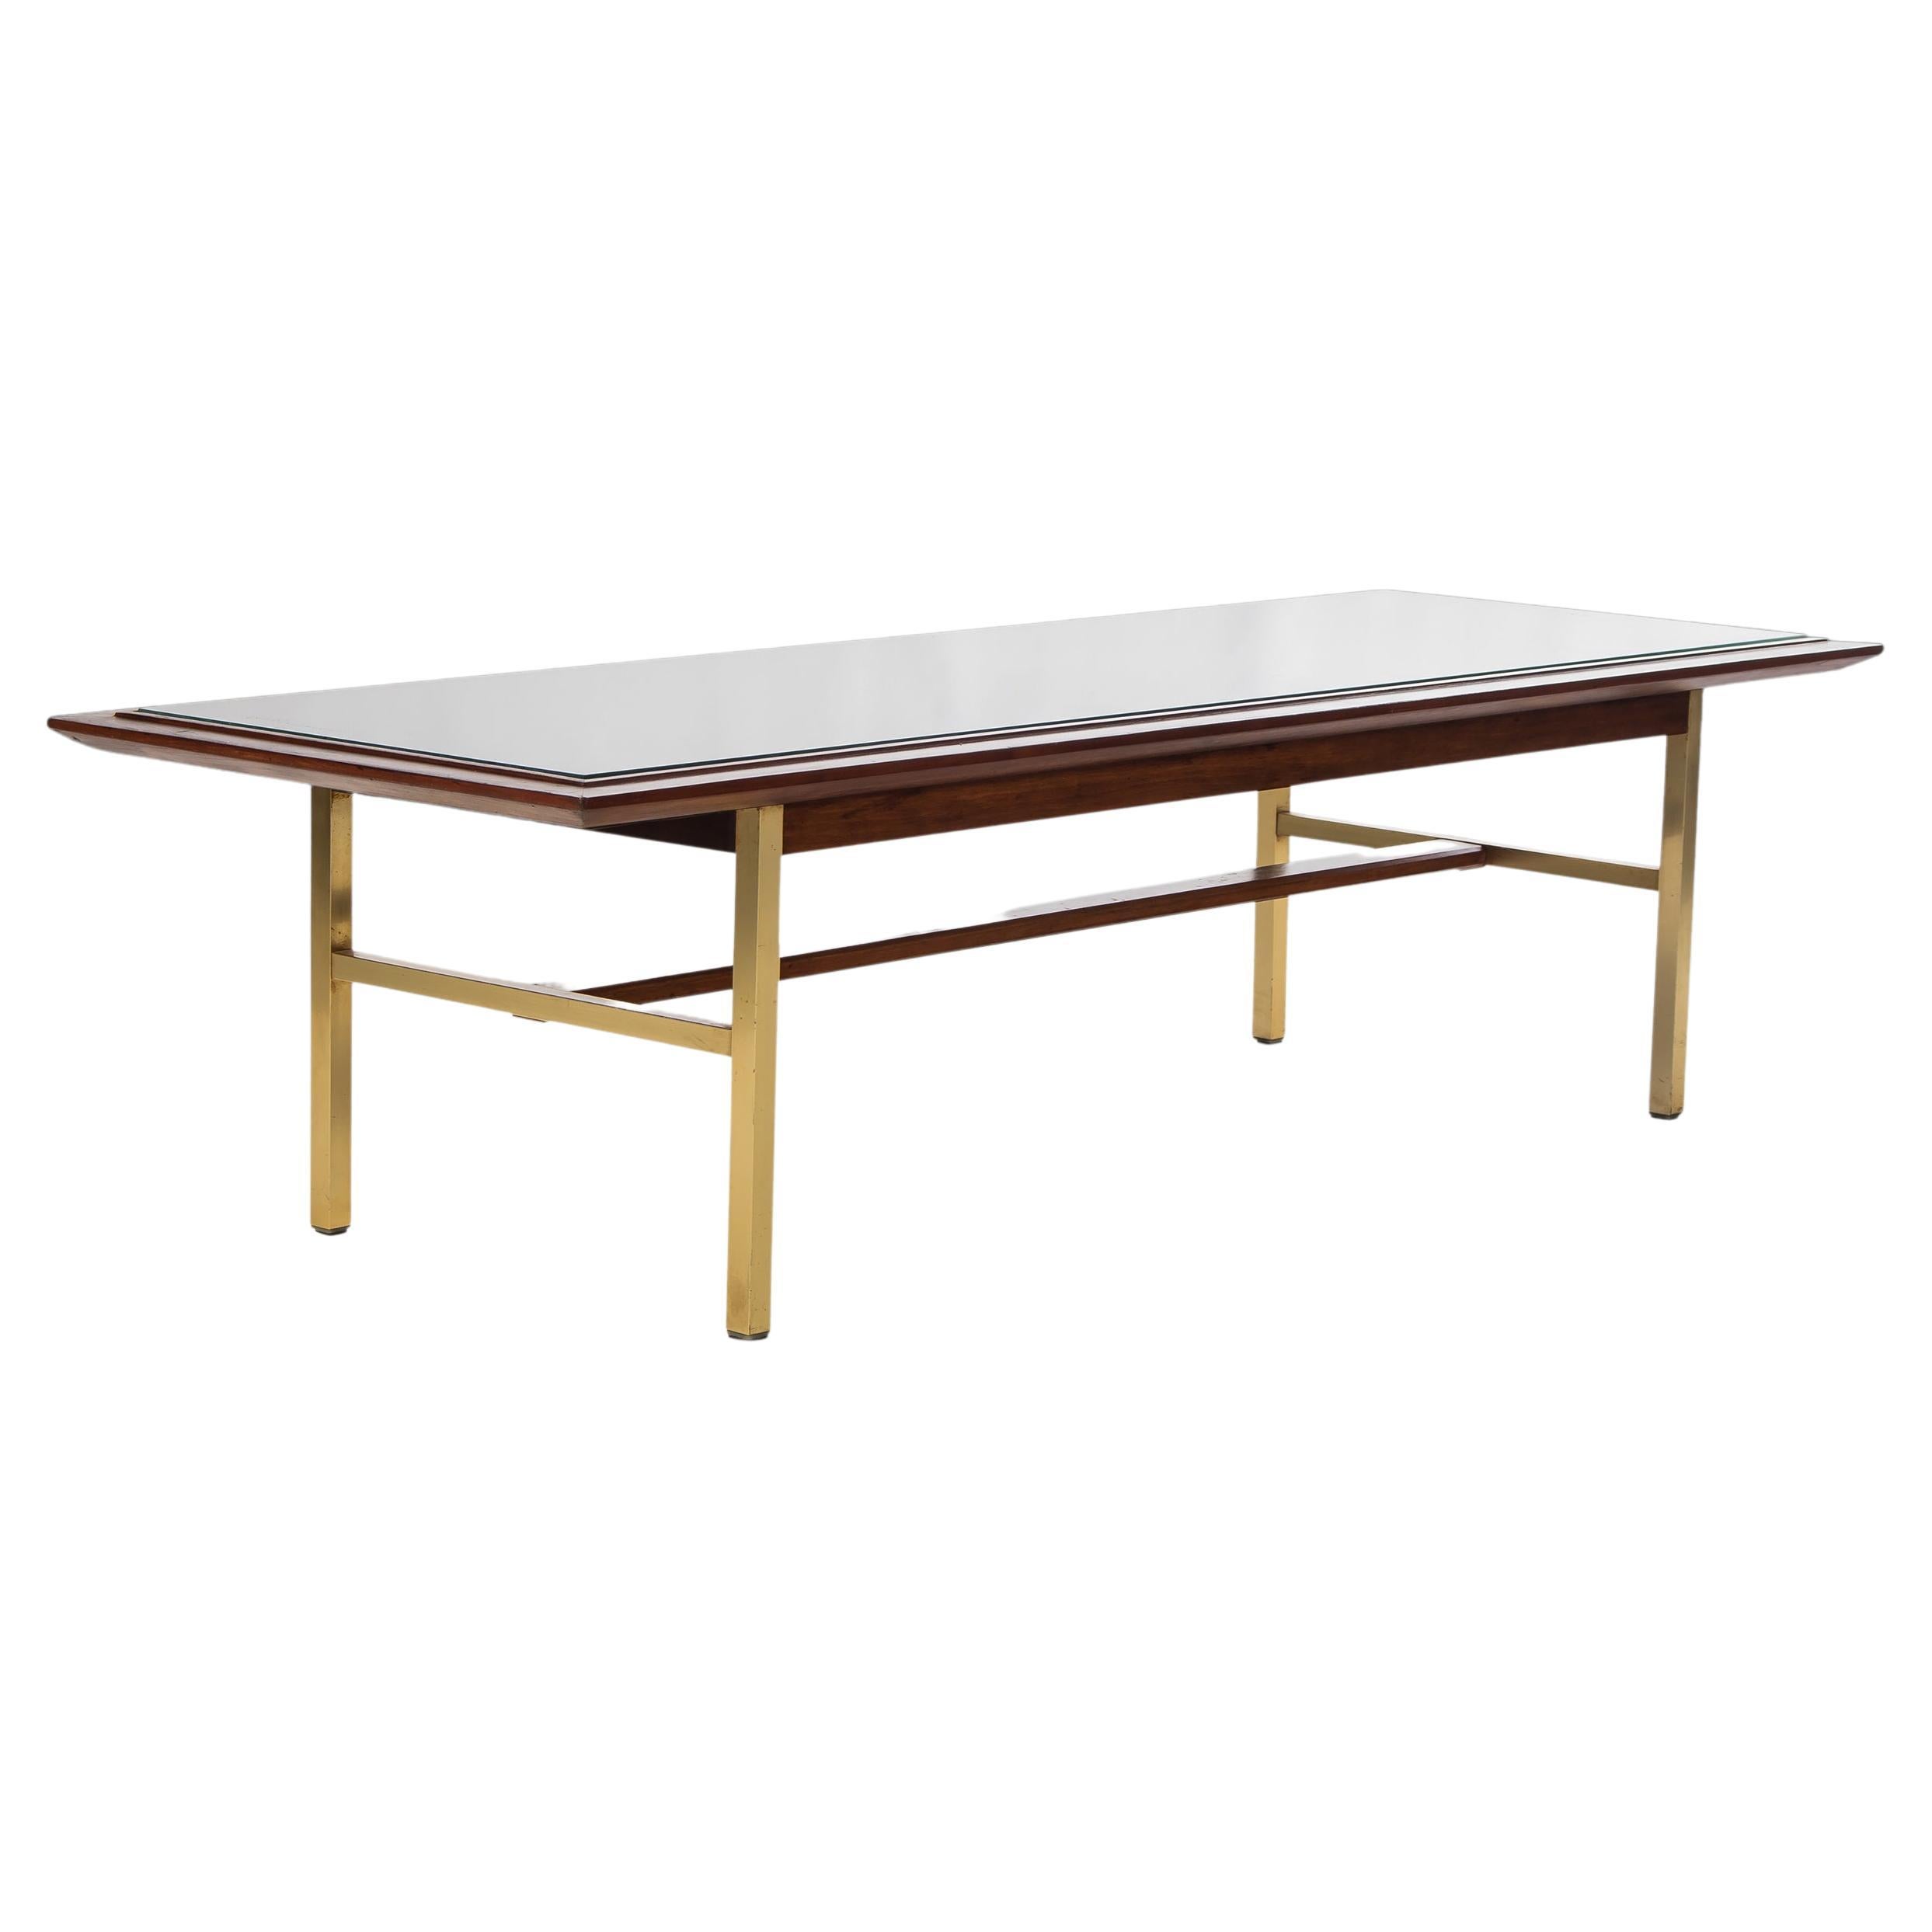 Produced by Drexel Sun Coast this coffee table, designed by Kipp Stewart & Stewart McDougall, is an exquisite example of early American mid-century design and craftsmanship. With solid walnut wood grains, luxurious brass legs and a fabulous cane top